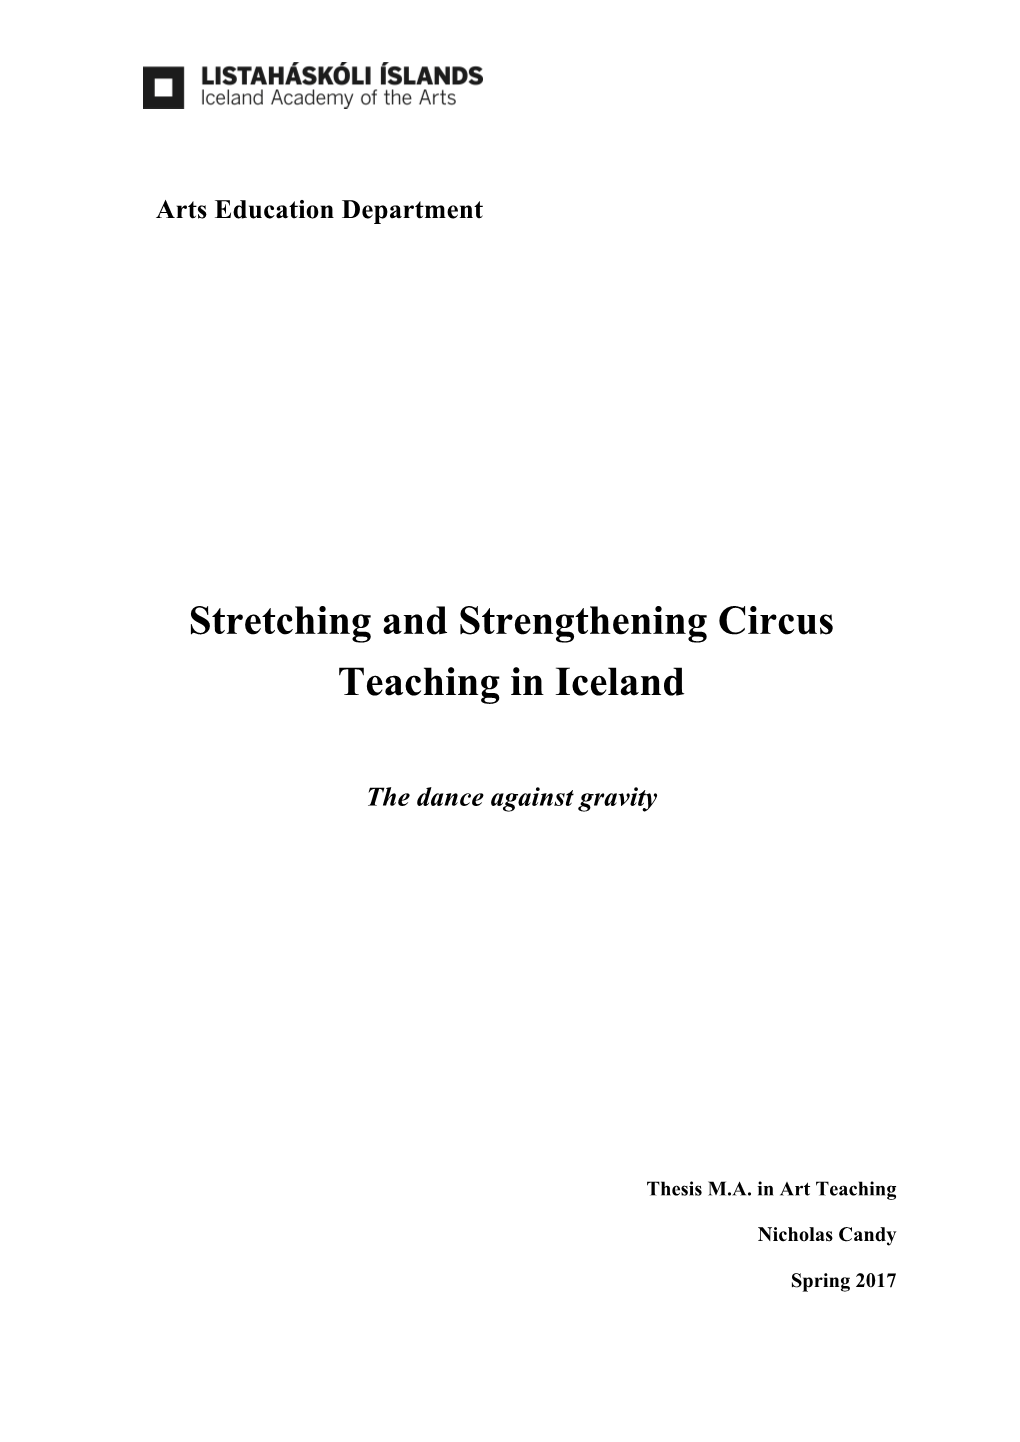 Stretching and Strengthening Circus Teaching in Iceland